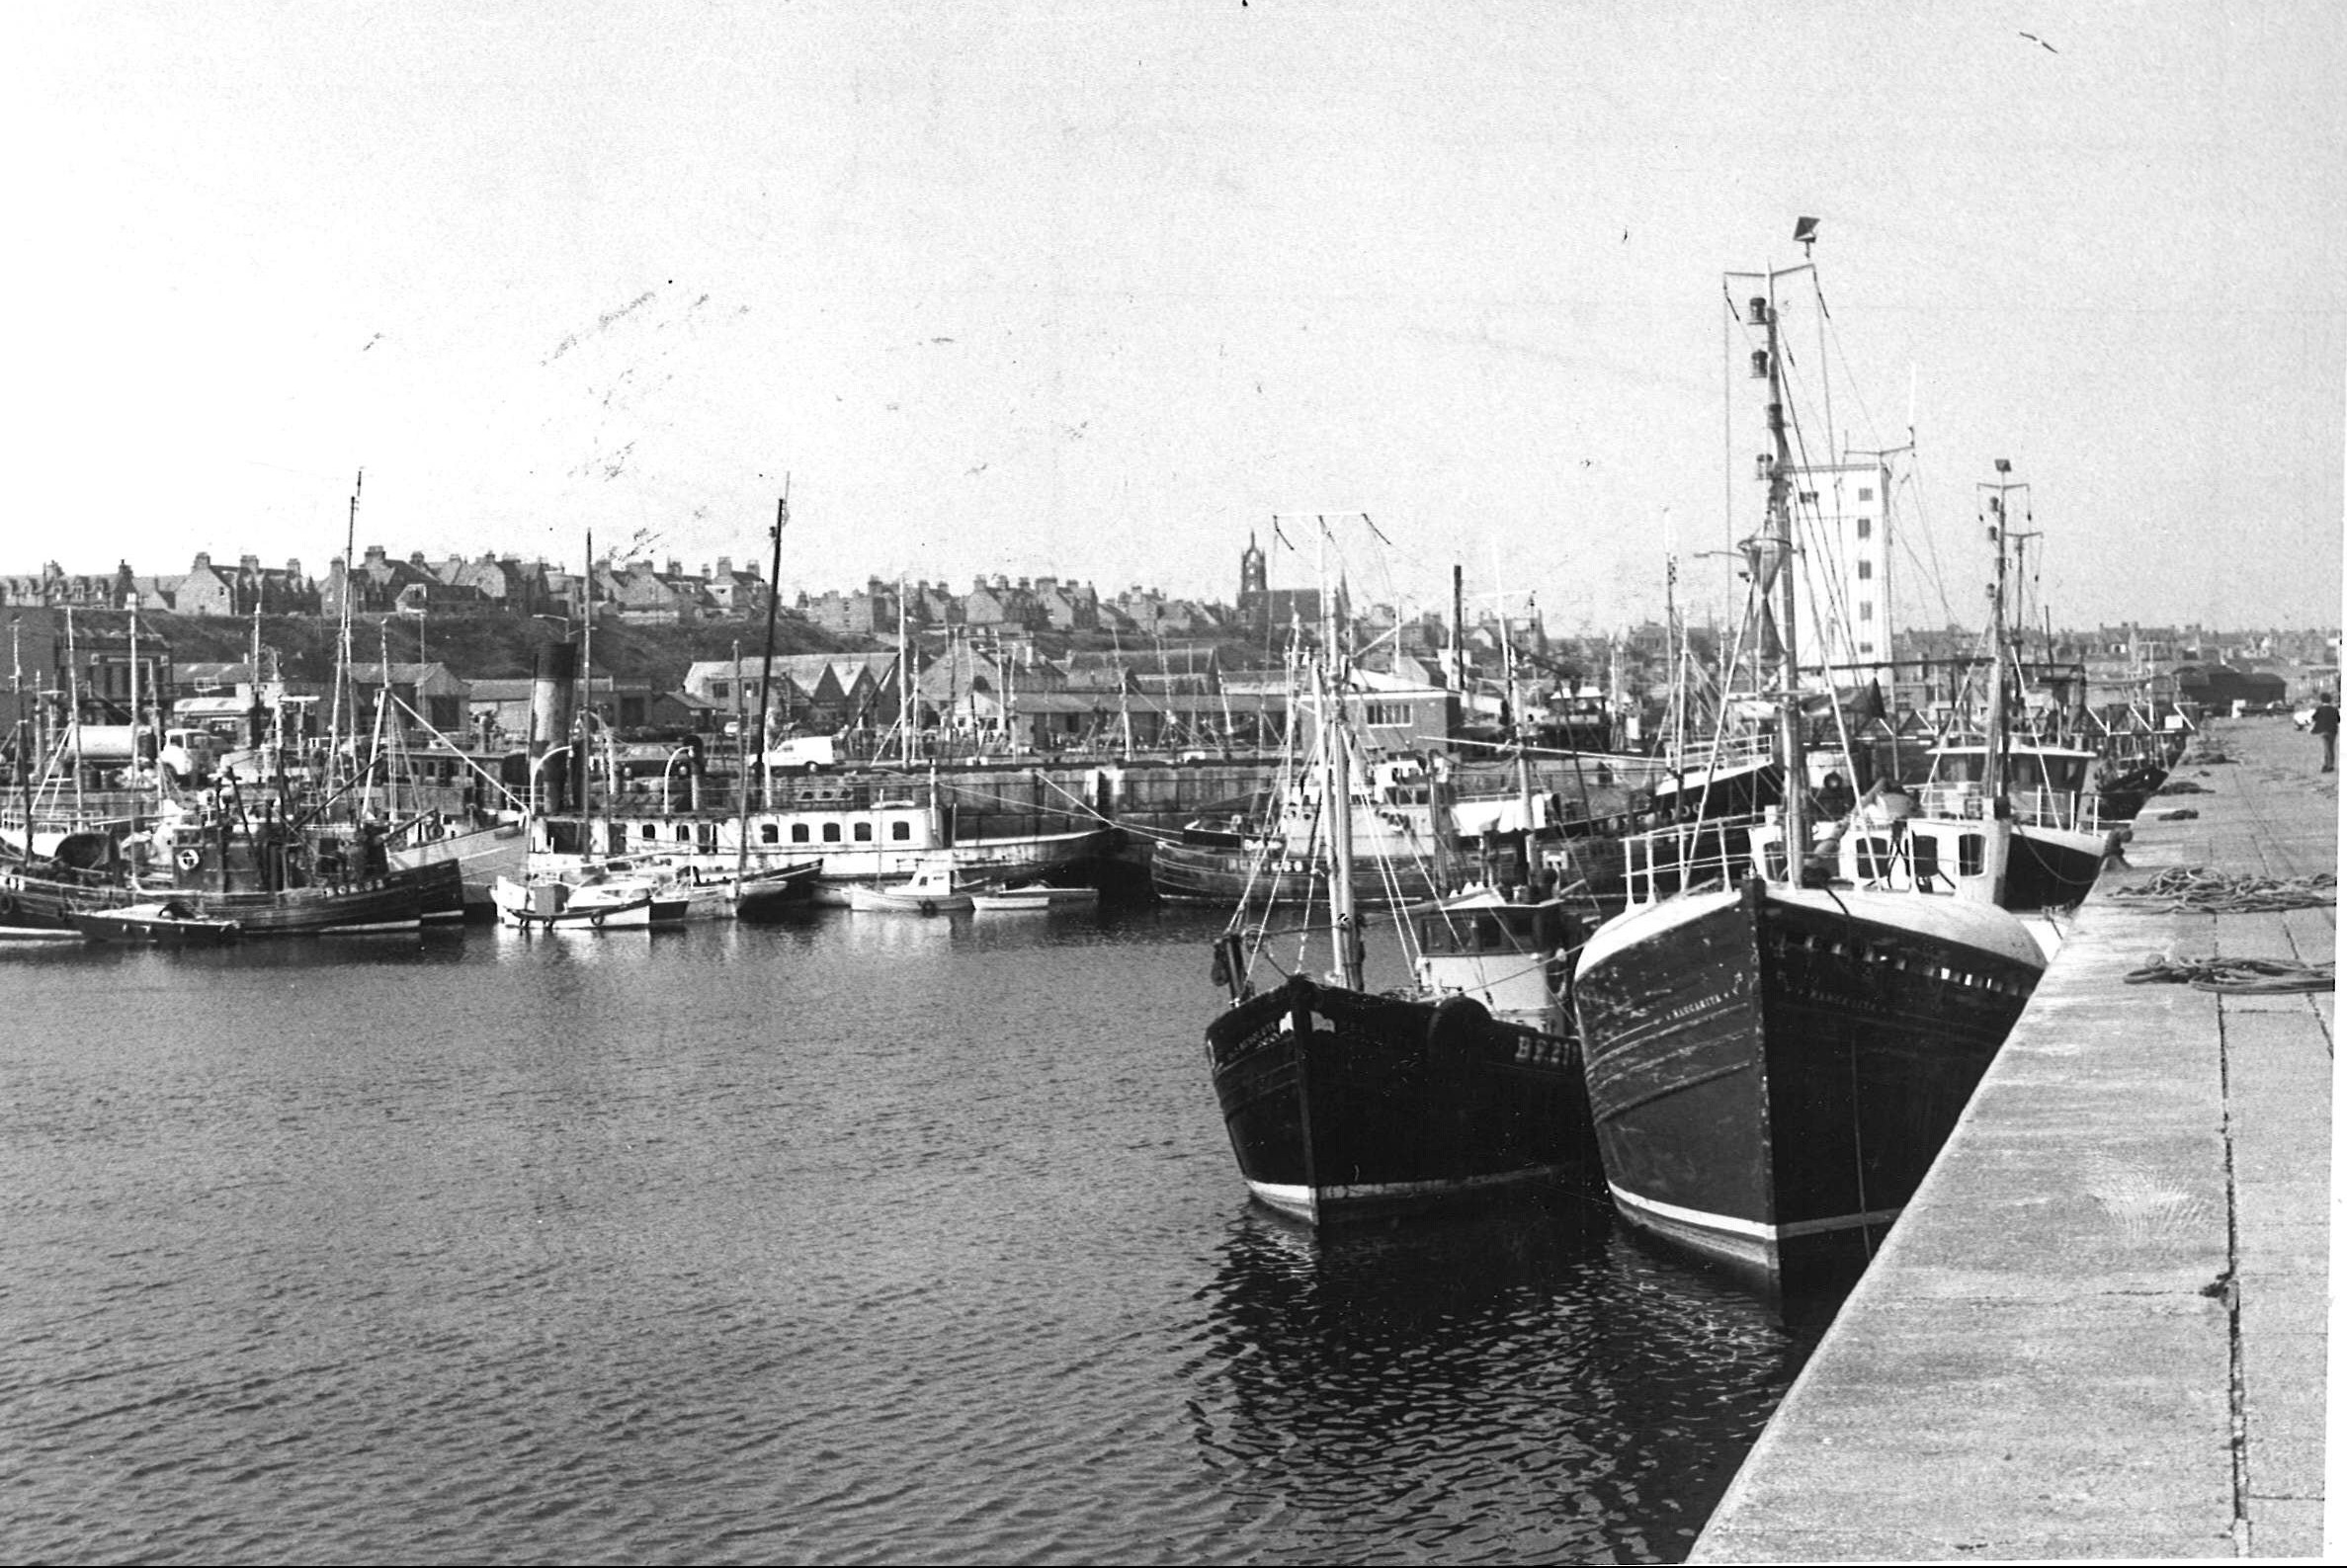 Buckie 1979, when prawn landings still remained at the Cluny Habour